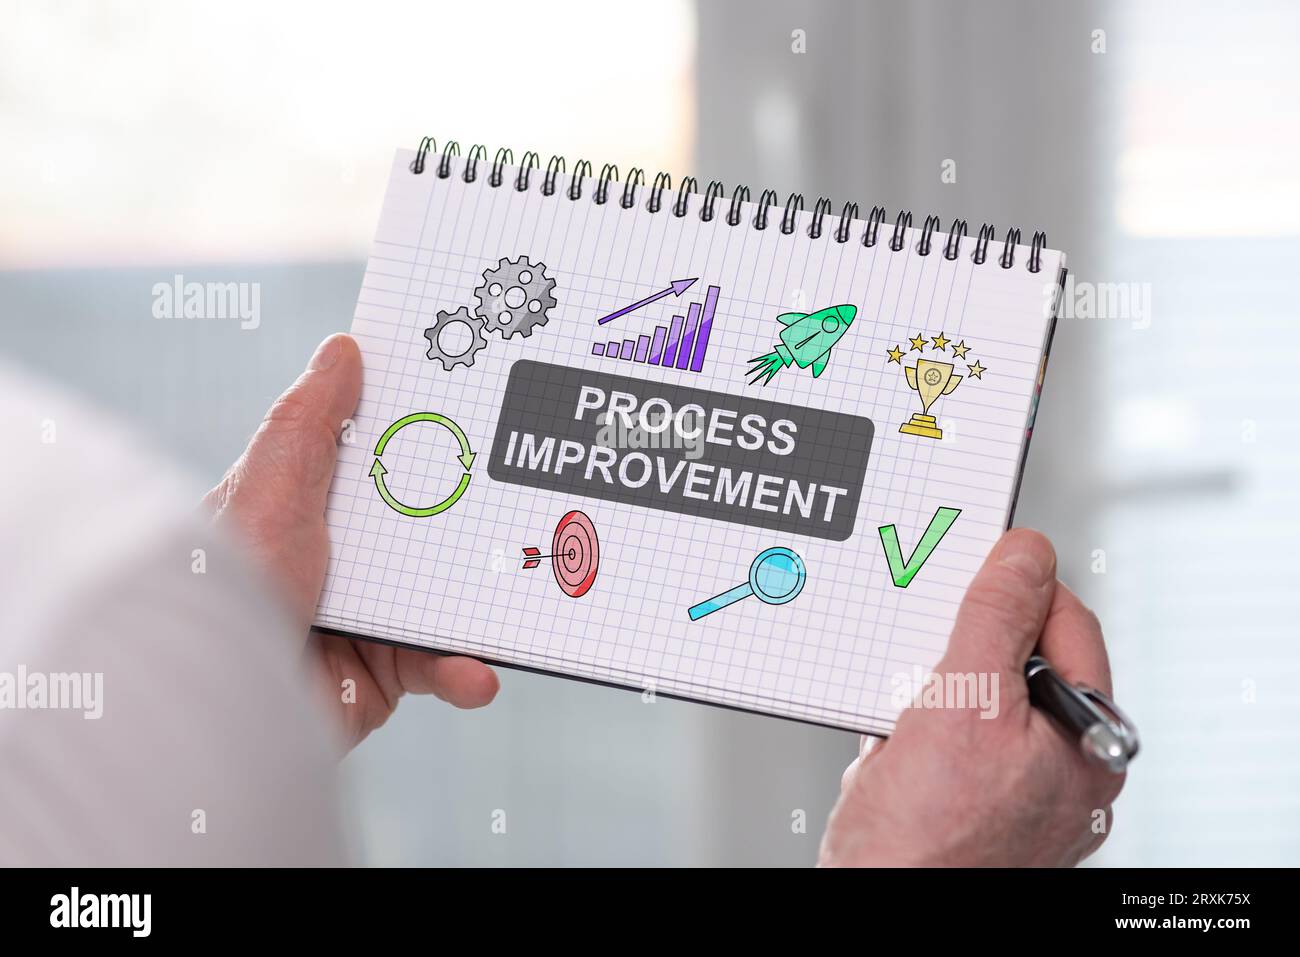 Hand holding a notepad with process improvement concept Stock Photo